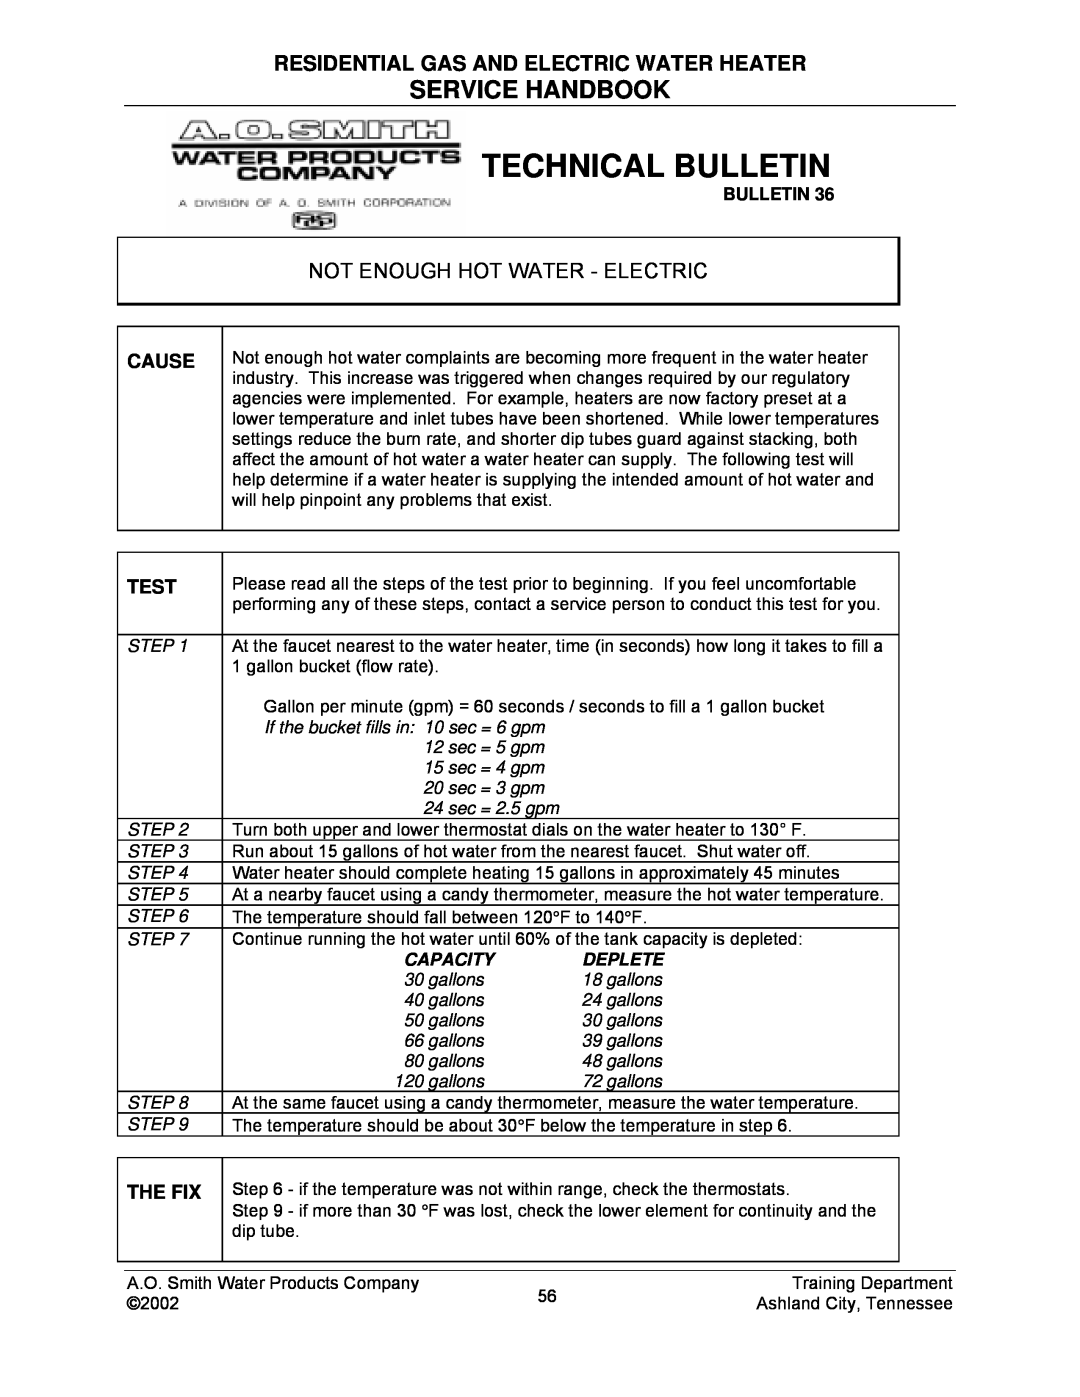 A.O. Smith TC-049-R2 Technical Bulletin, Service Handbook, Residential Gas And Electric Water Heater, Capacity, Deplete 